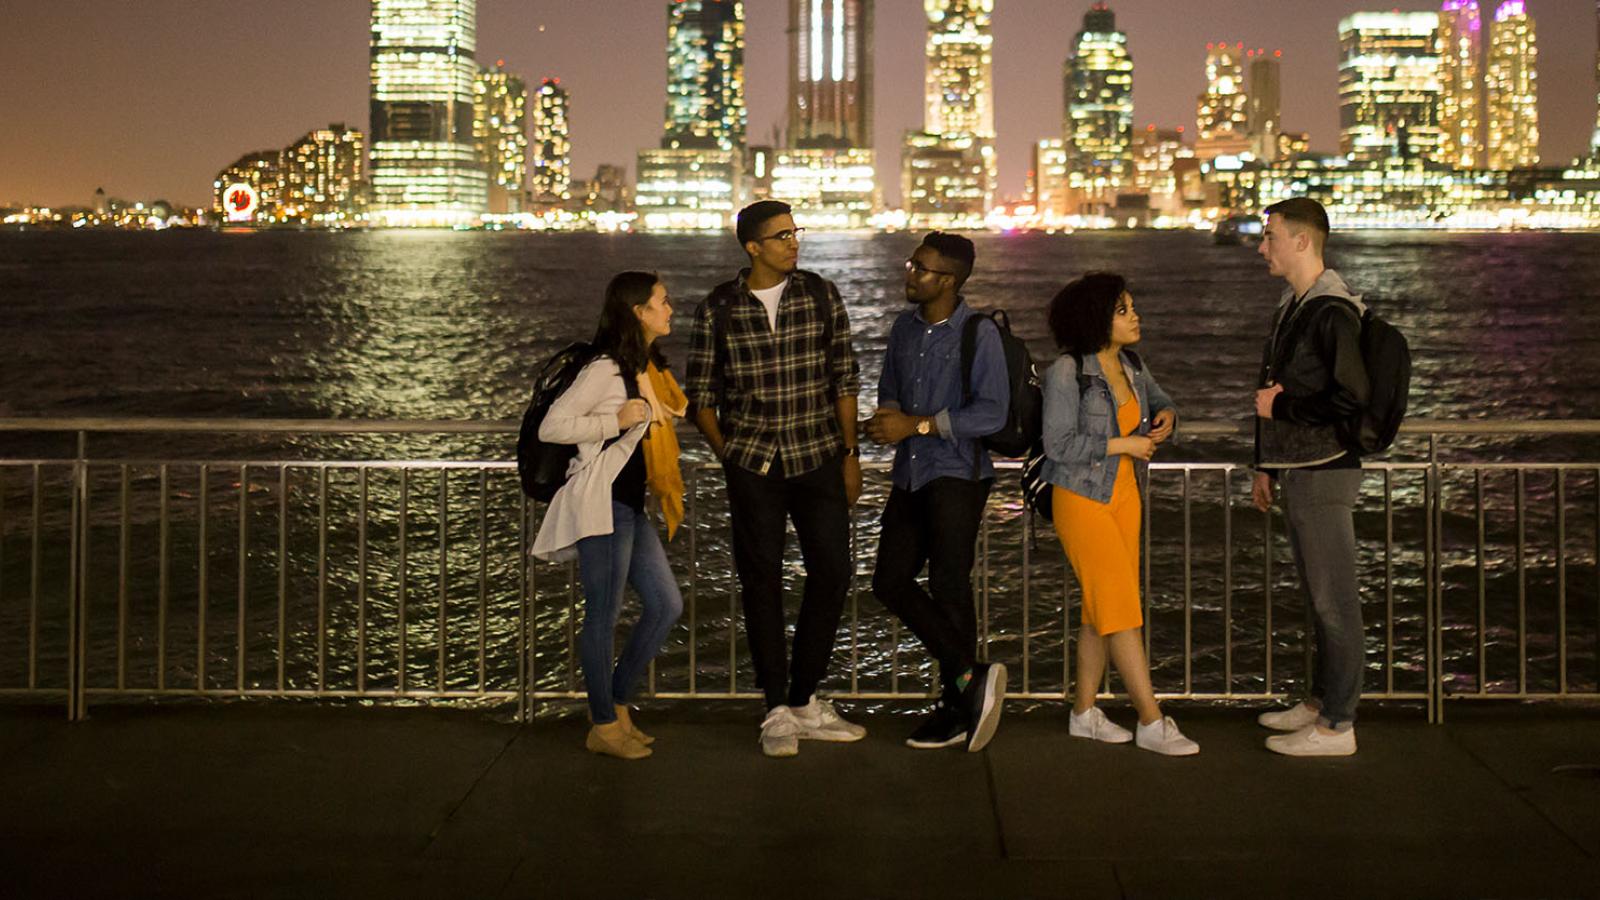 Five students at night looking at the NYC skyline over the water